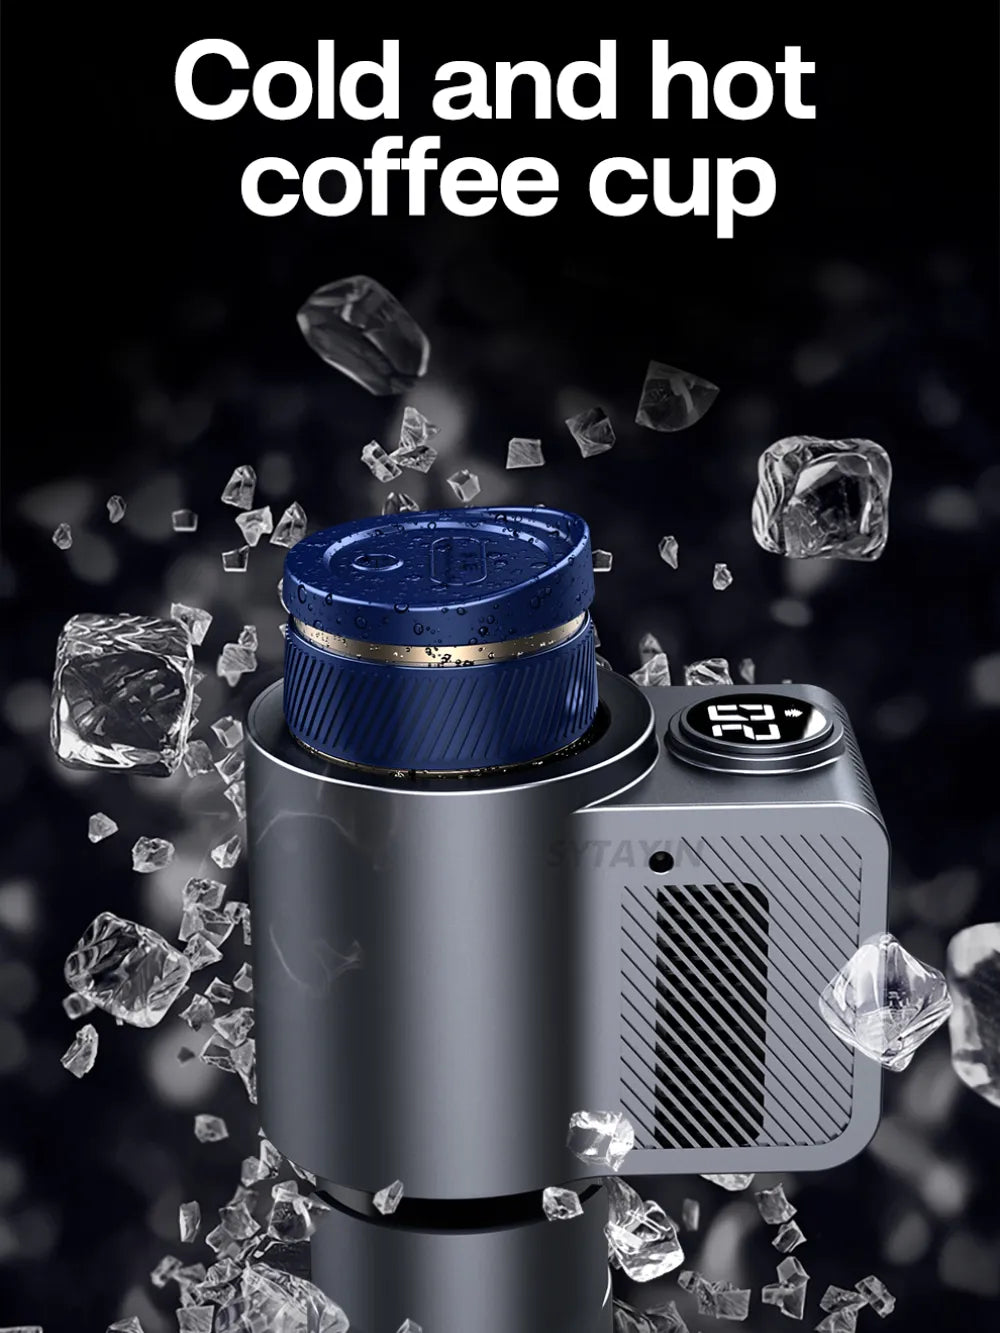 Car Coffee Heating Cooling Cup Hot and Cold Dual Position Stainless Steel Coffee Cup Travel Electric Warmer Mug for Office Home